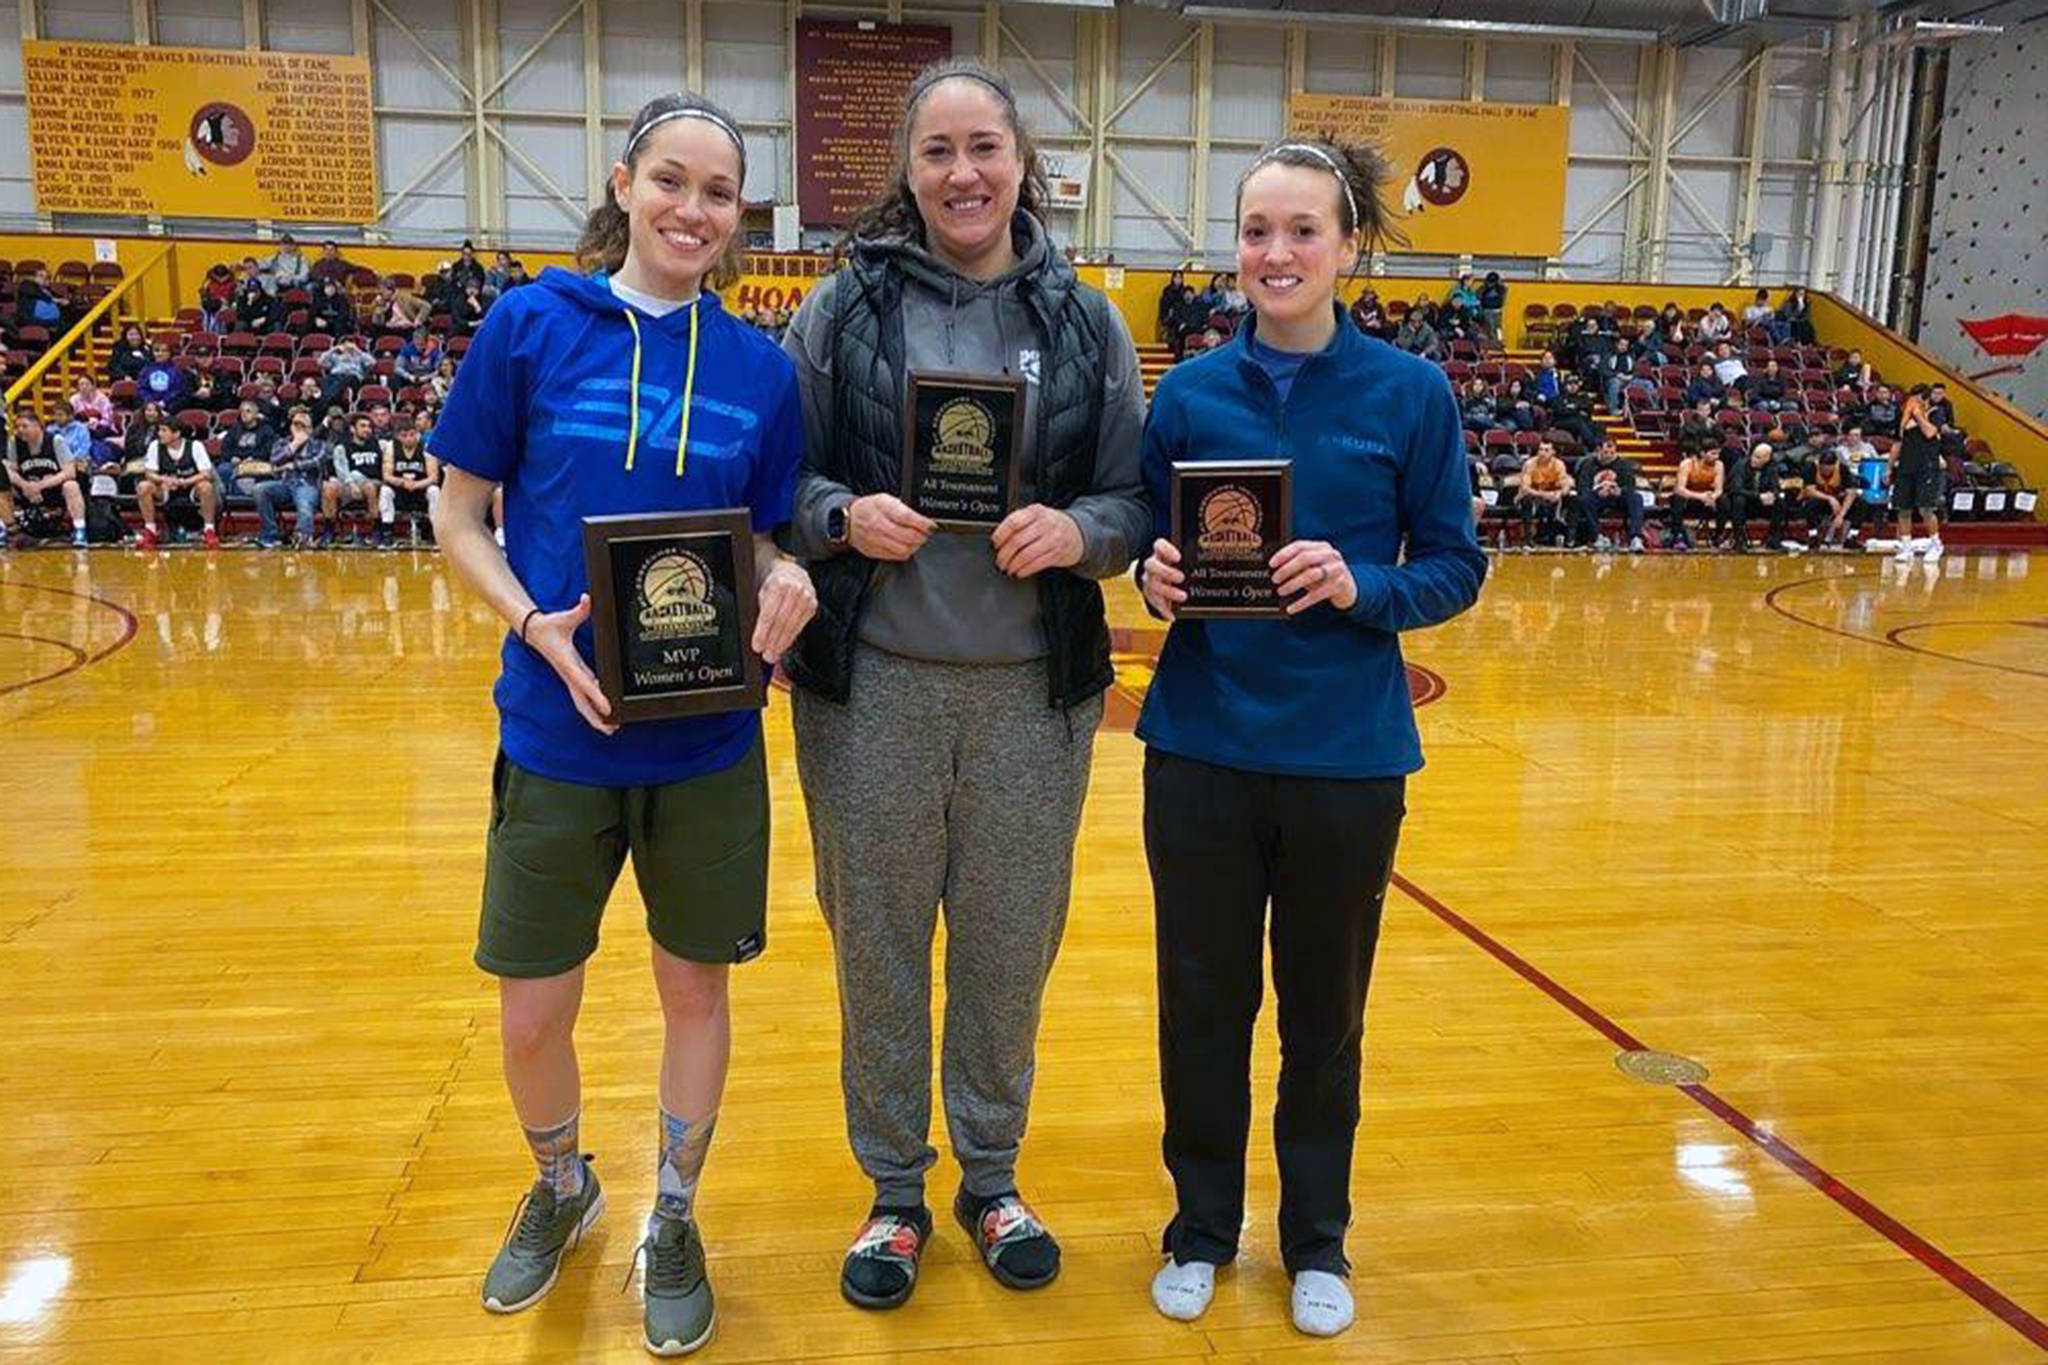 Mariah Simpkins, Danielle Larson and Nani Weimer hold their all-tournament plaques after the Mt. Edgecumbe Invitational. (Courtesy Photo | Juneau Monstarz)